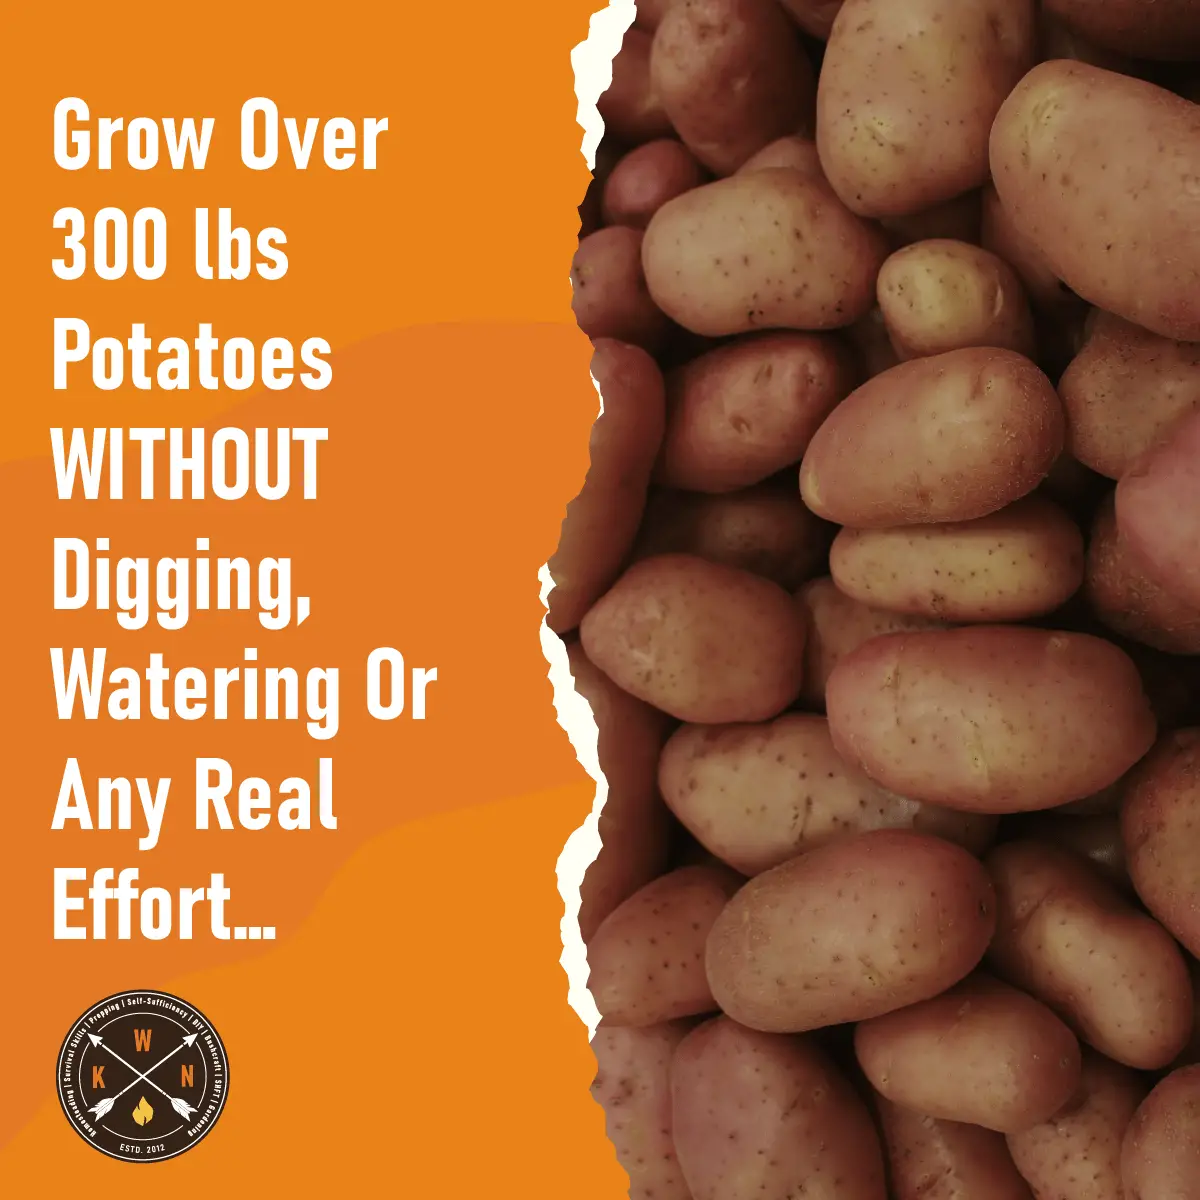 Grow-Over-300-lbs-Potatoes-WITHOUT-Digging-Watering-Or-Any-Real-Effort